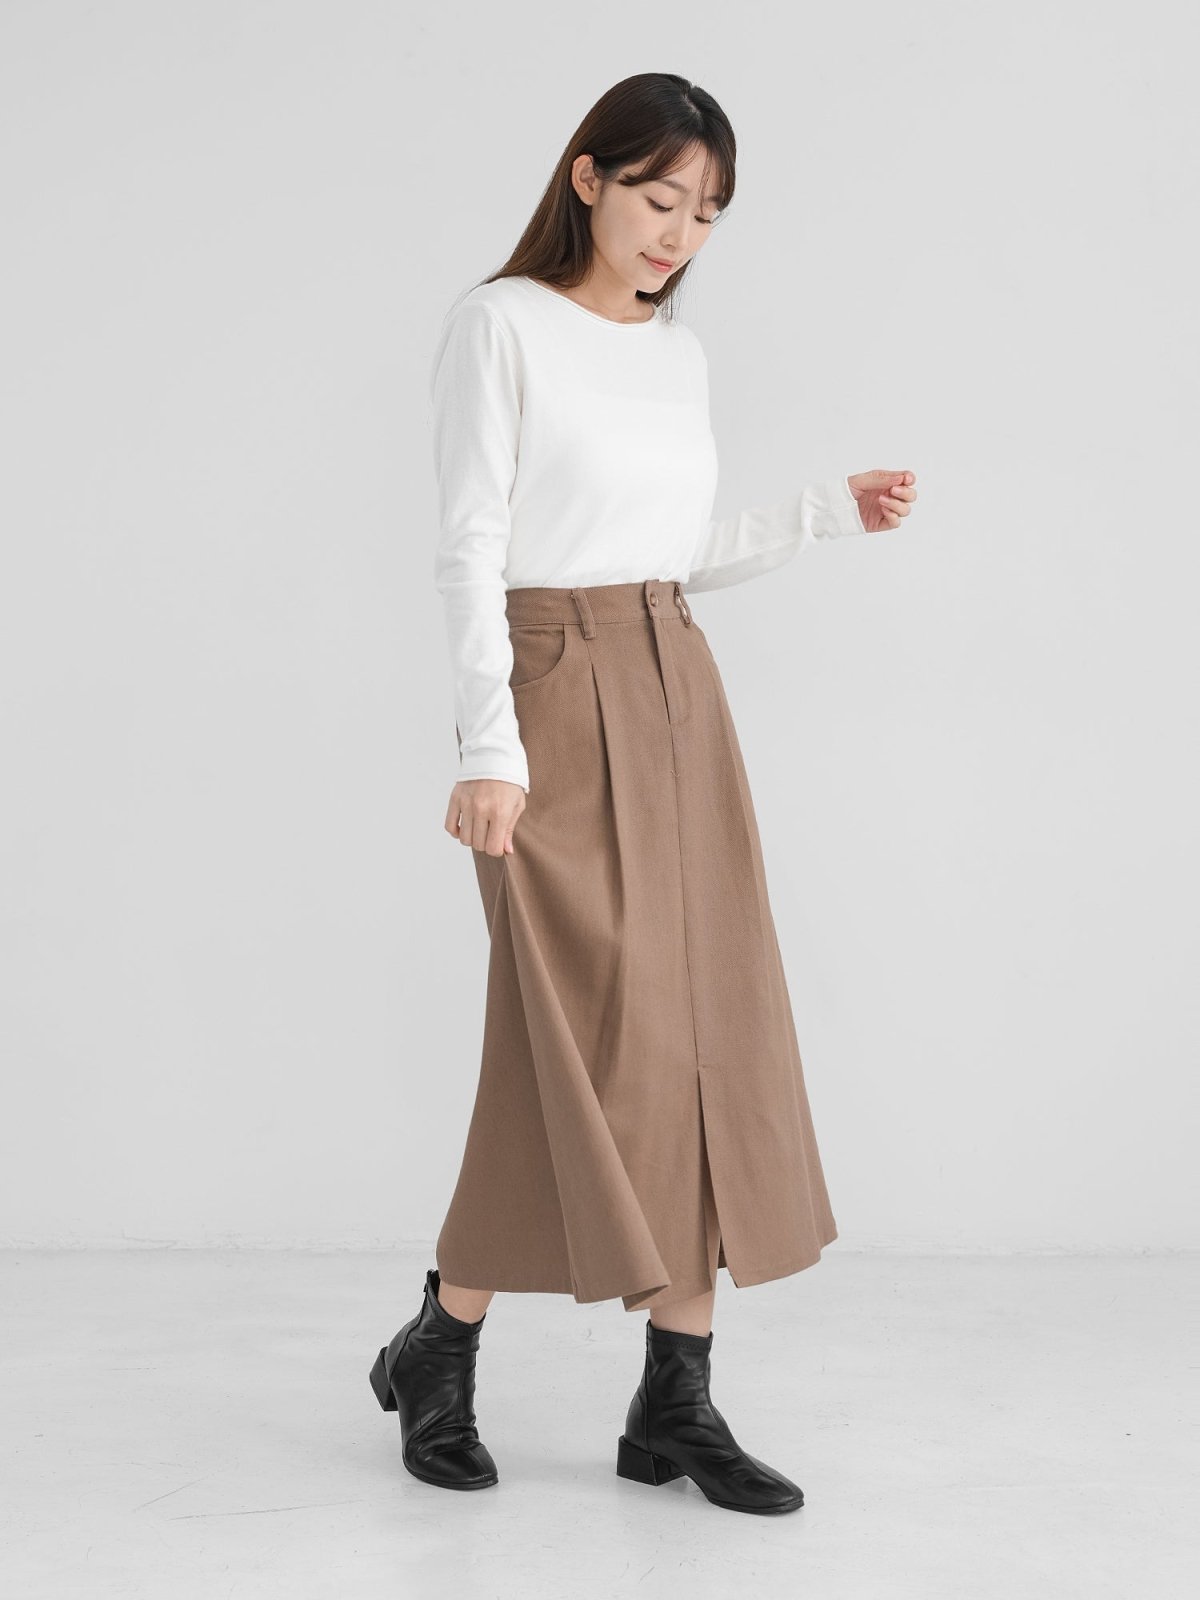 Maisy Front Slit Twill Skirt - DAG-DD1304-23BrownieS - Brownie - S - D'zage Designs